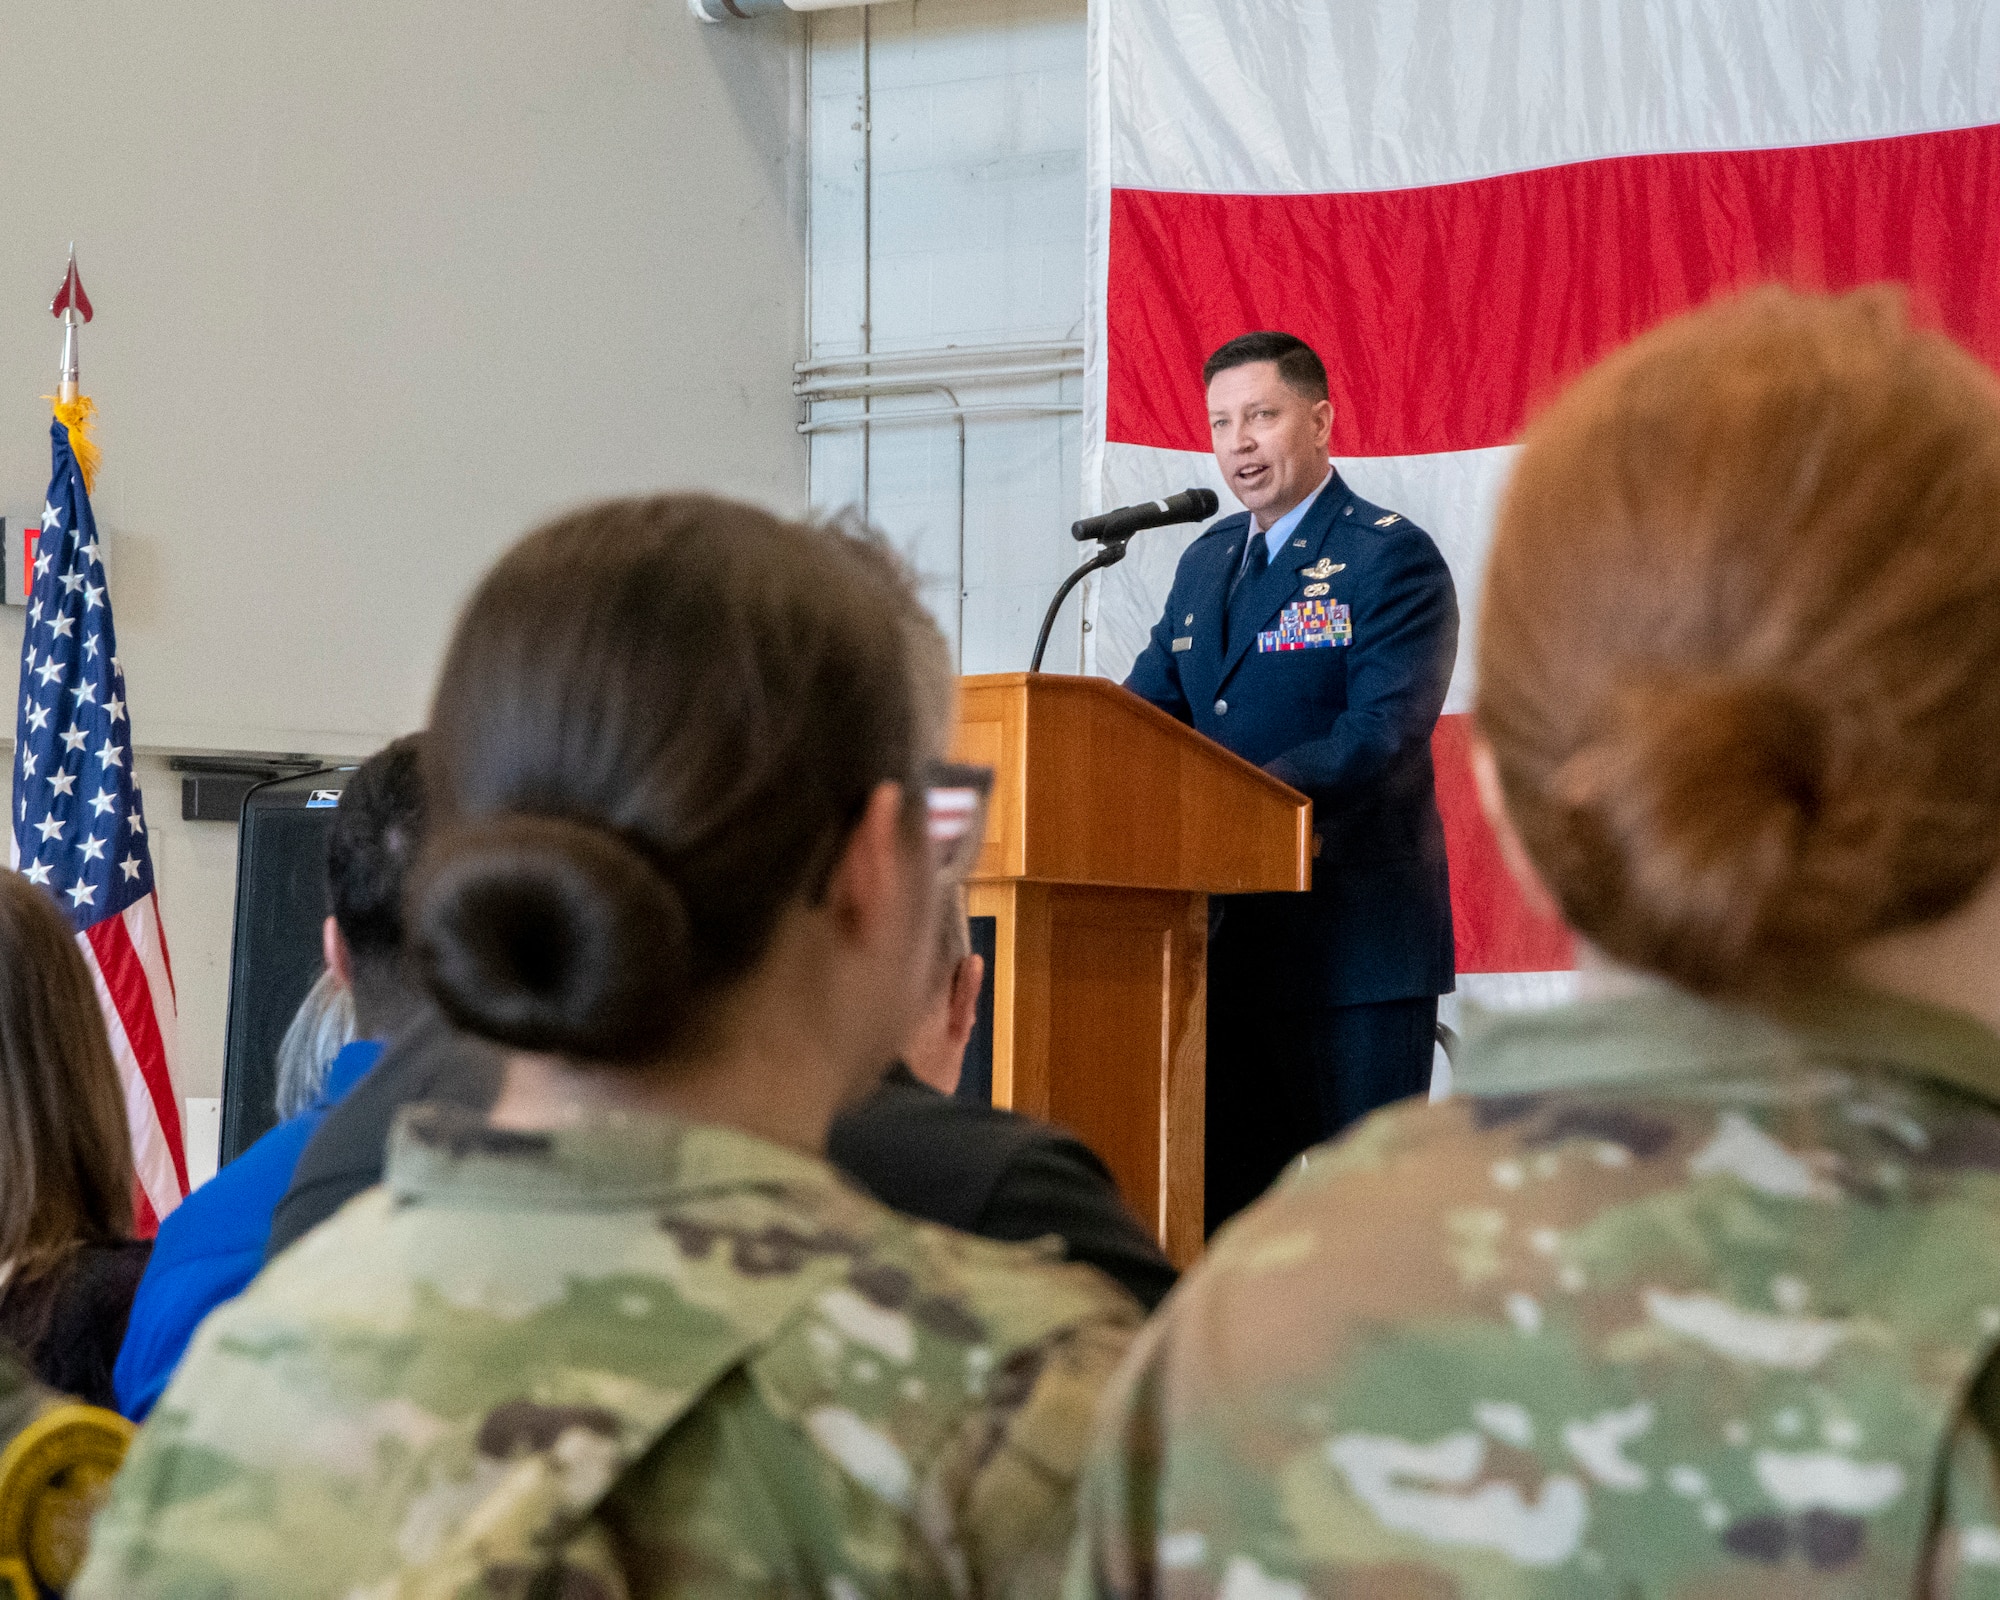 Military member speaks on stage in front of a podium. Picture is taken from the crowd behind two female military members.